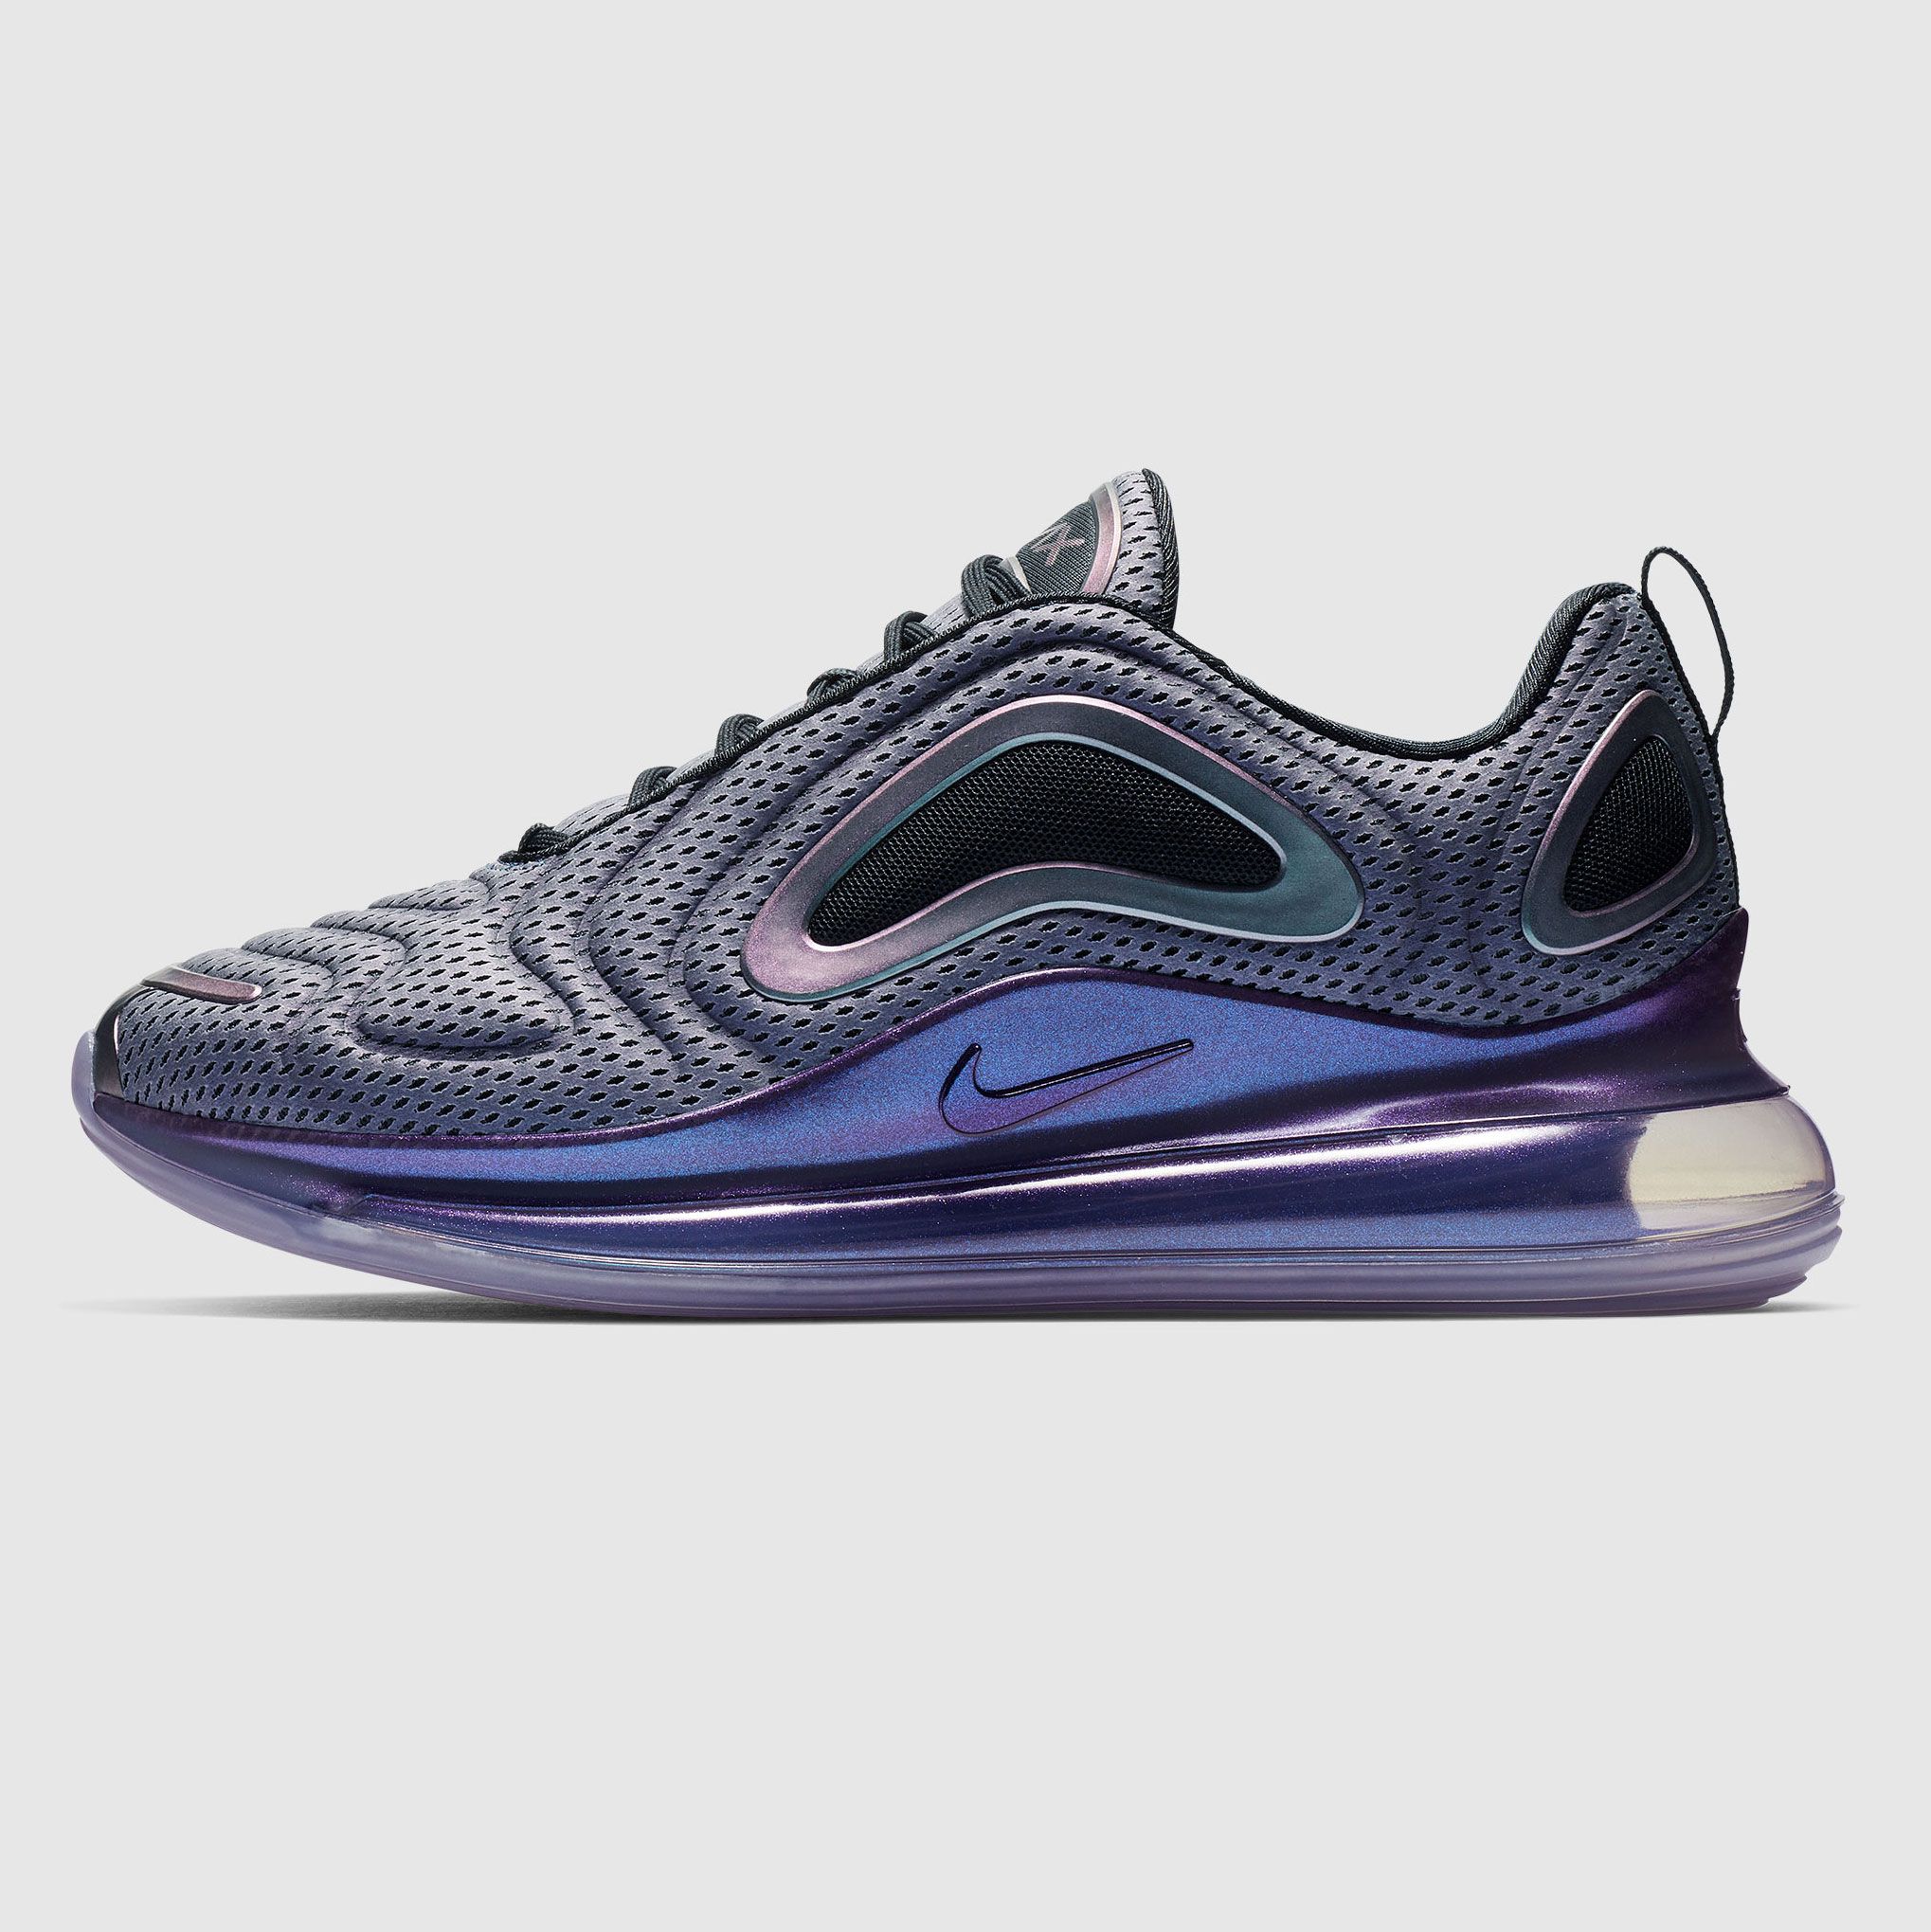 Ringlet aanklager energie Nike's Air Max 720 Just Got Its Full, Official Reveal - Air Max 720 Release  Date